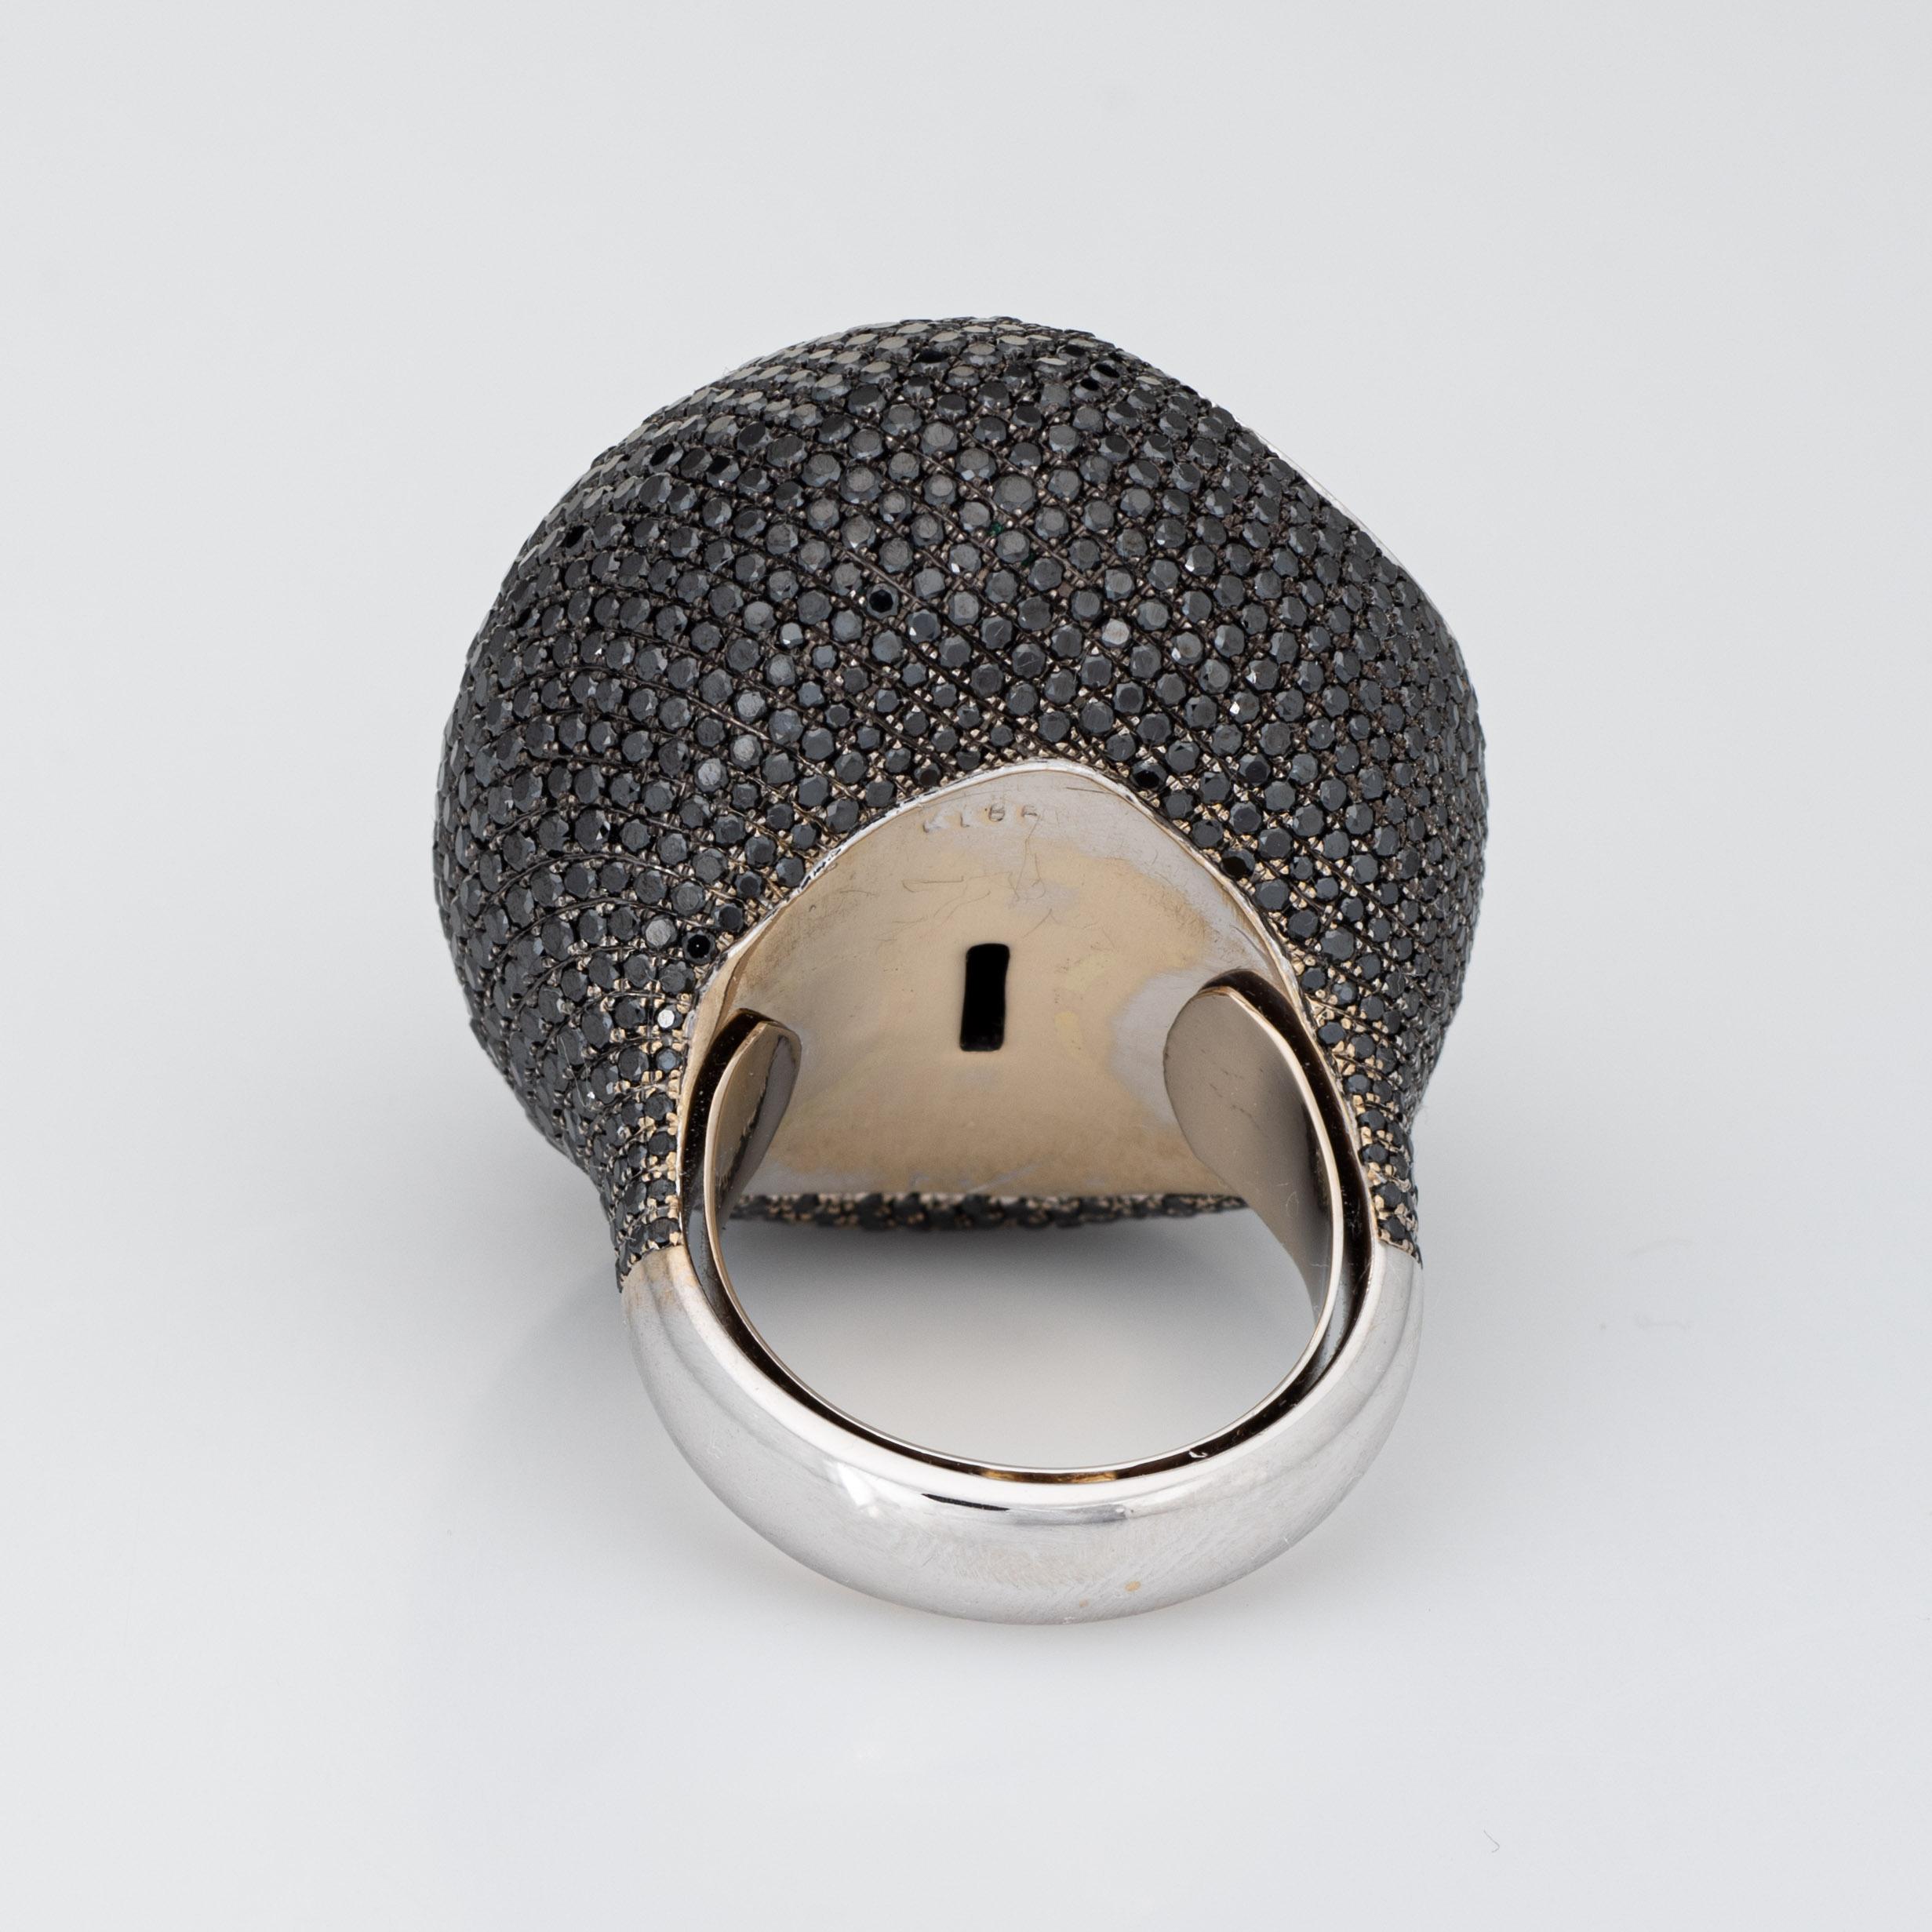 Contemporary 5ct Black Diamond Moon Crater Ring Estate 18k White Gold Large Round Orb Dome